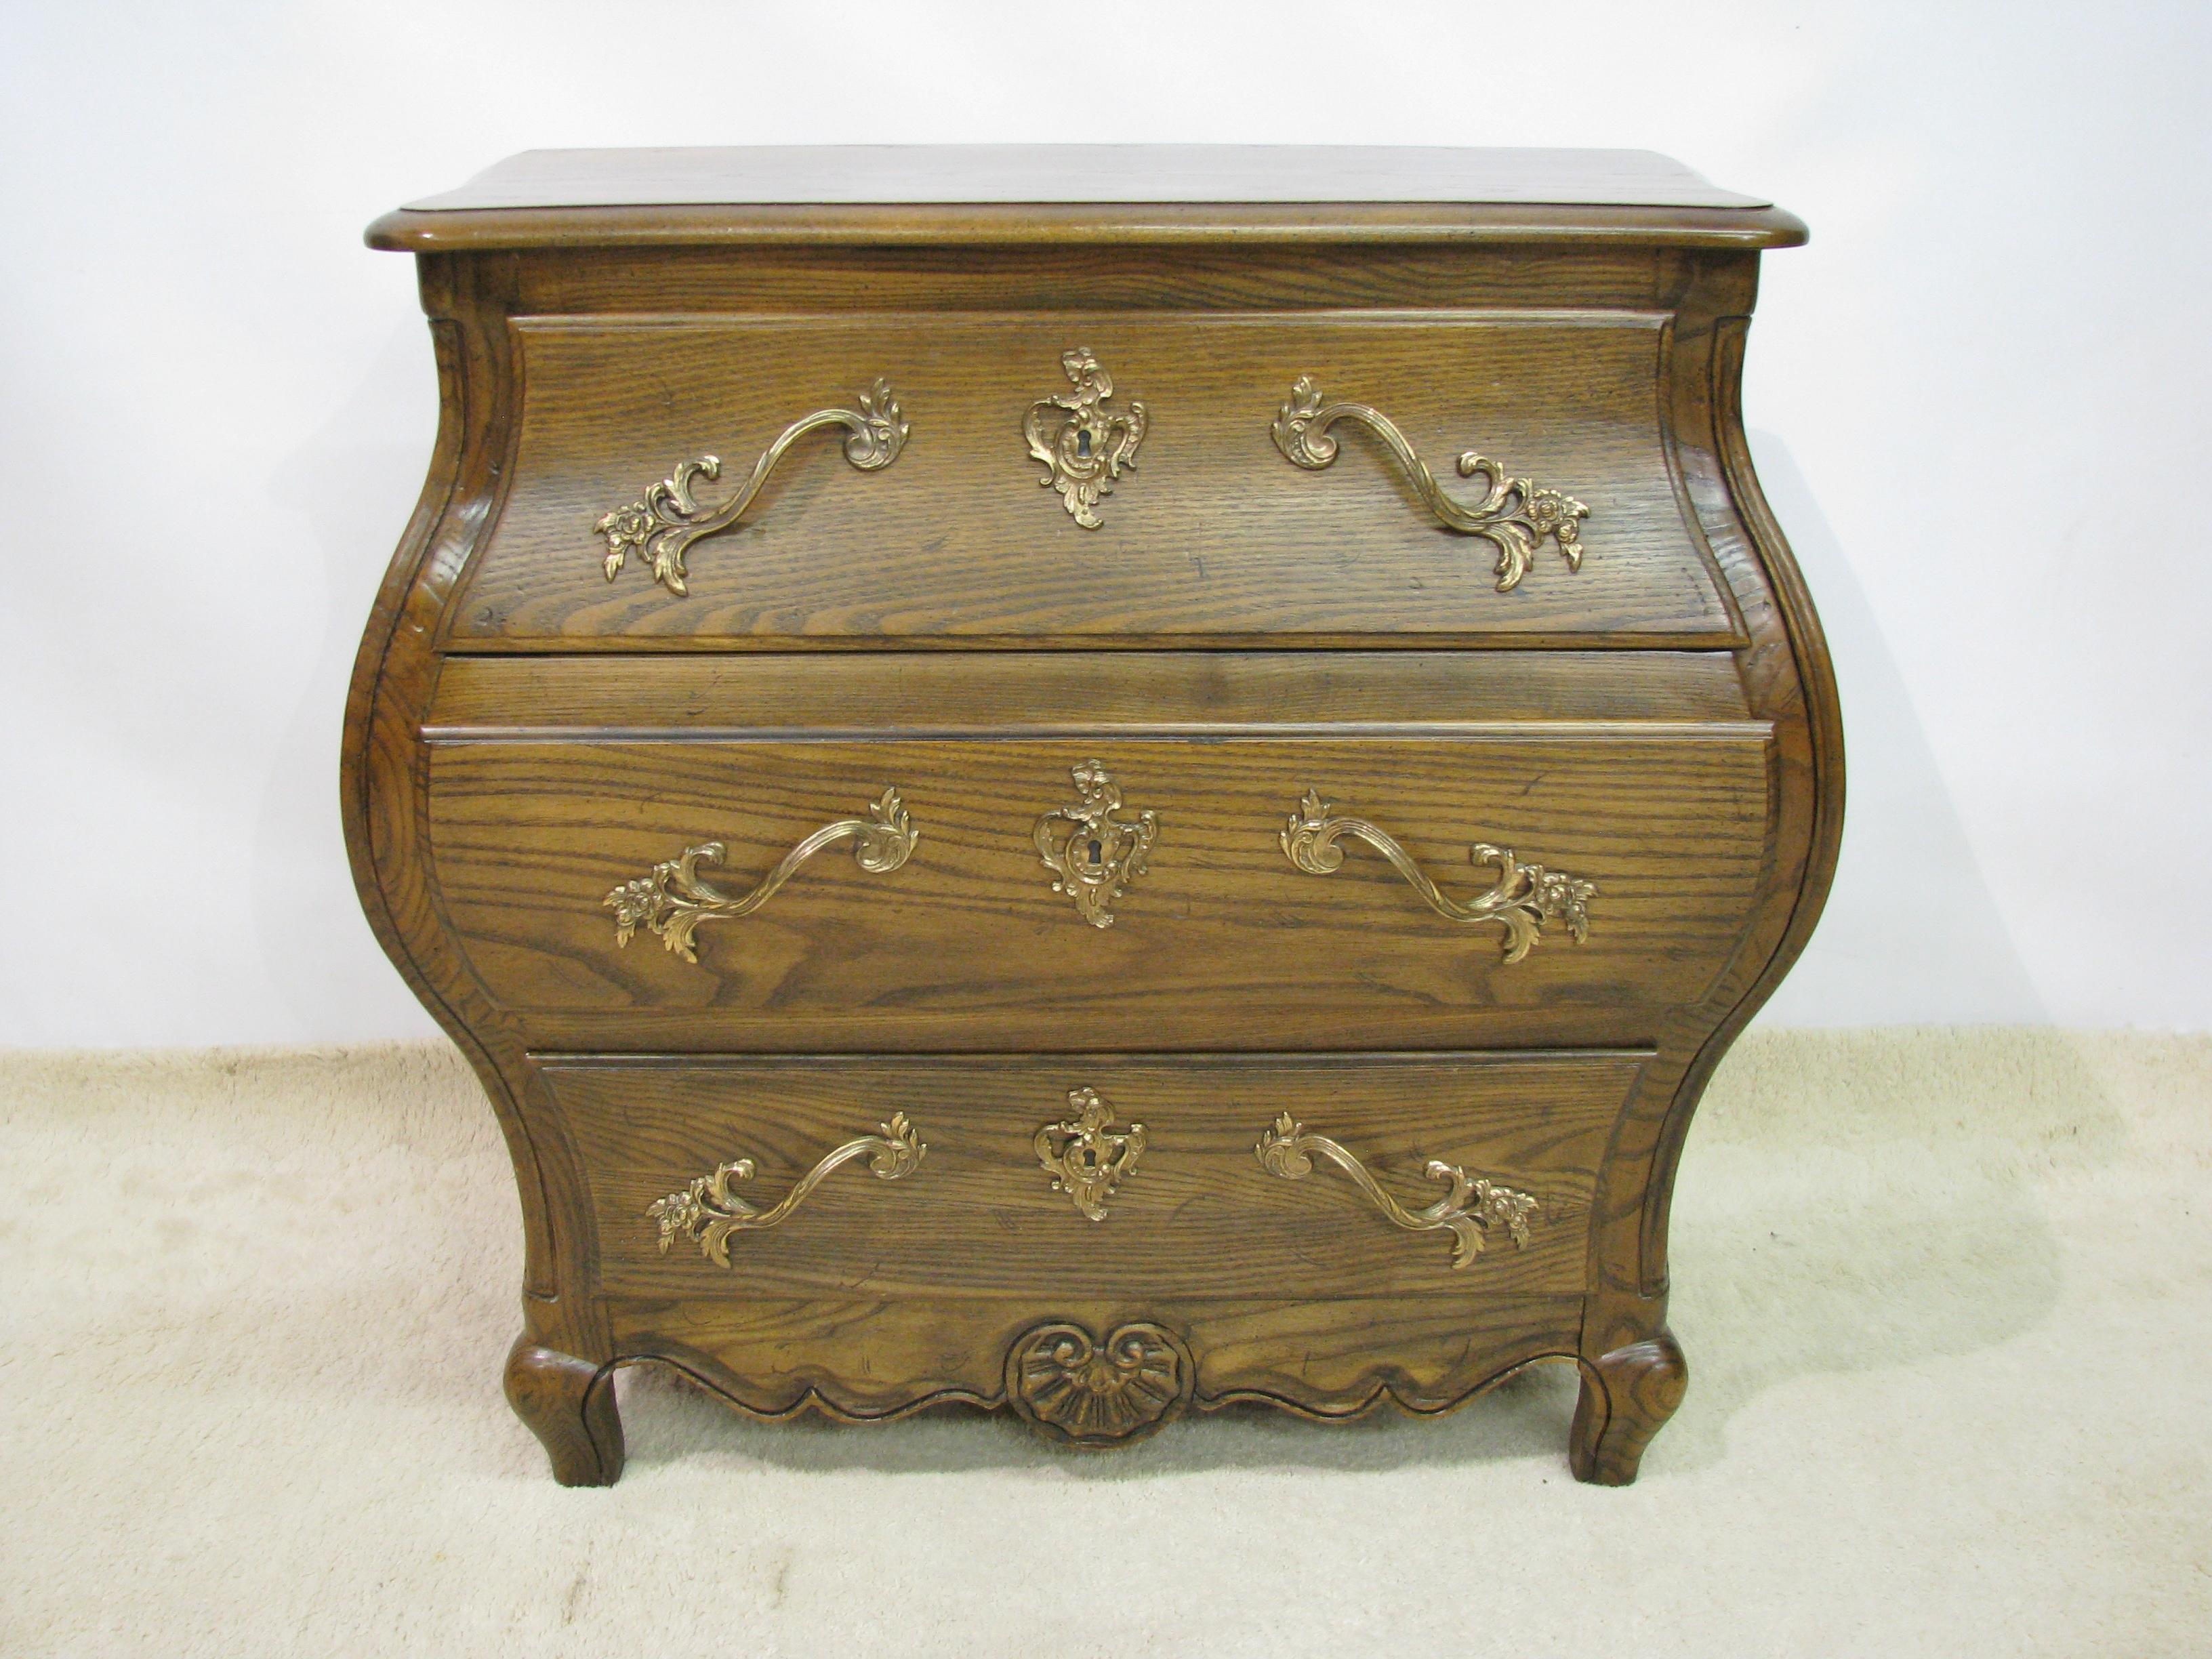 Elegant small scale Bombe chest by Baker Furniture. Solid oak, with a shaped top over a dramatically curved front. Medium brown satin finish, with solid antiqued brass Louis XV style hardware. Solid oak secondary woods and dovetailed drawers. Baker